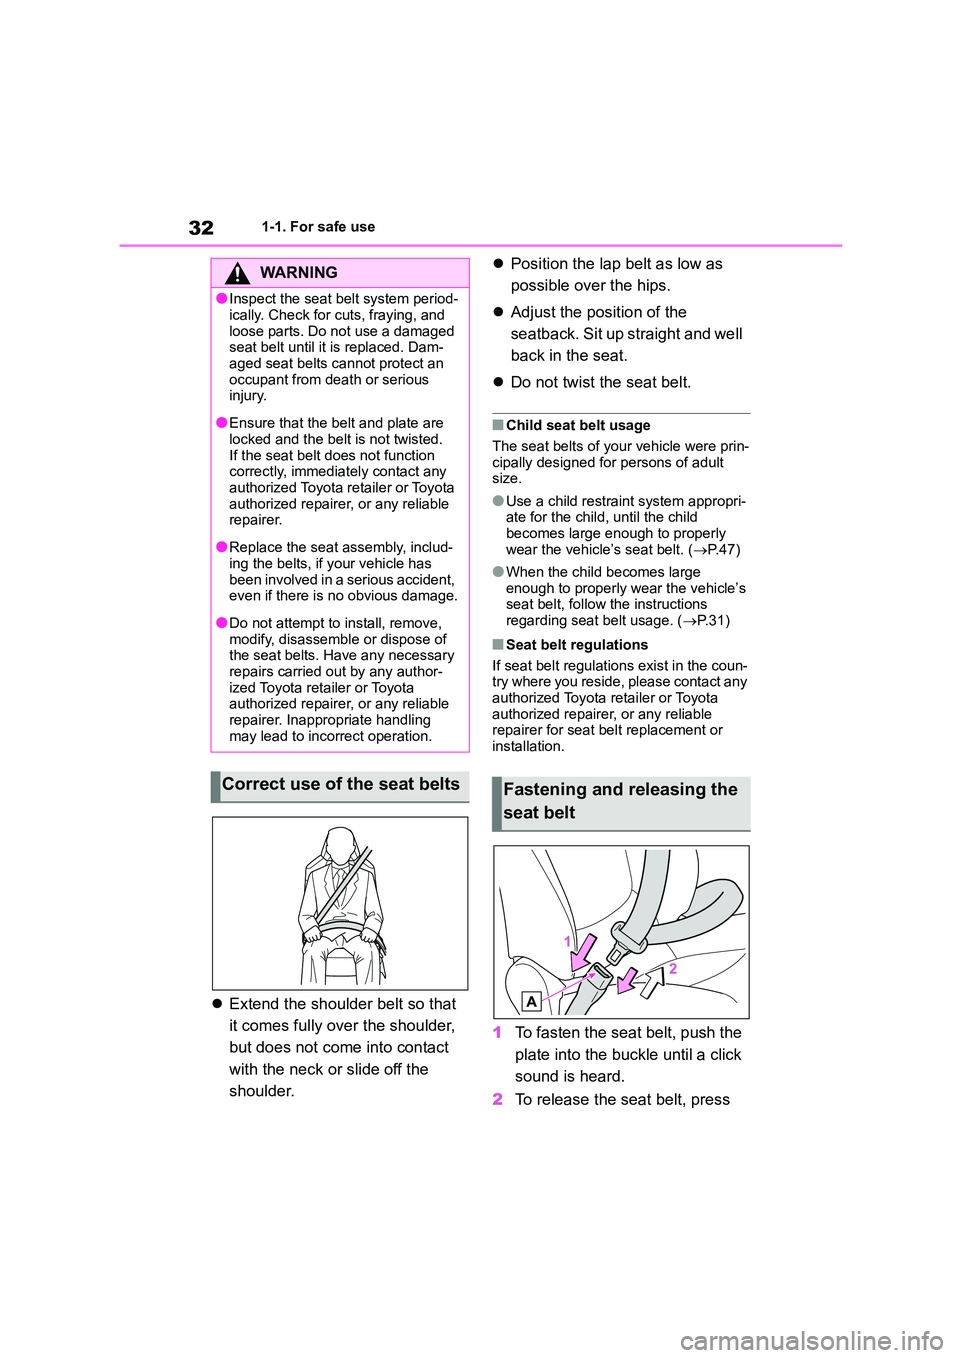 TOYOTA COROLLA 2022  Owners Manual (in English) 321-1. For safe use
Extend the shoulder belt so that  
it comes fully over the shoulder, 
but does not come into contact 
with the neck or slide off the 
shoulder. 
 Position the lap belt as low